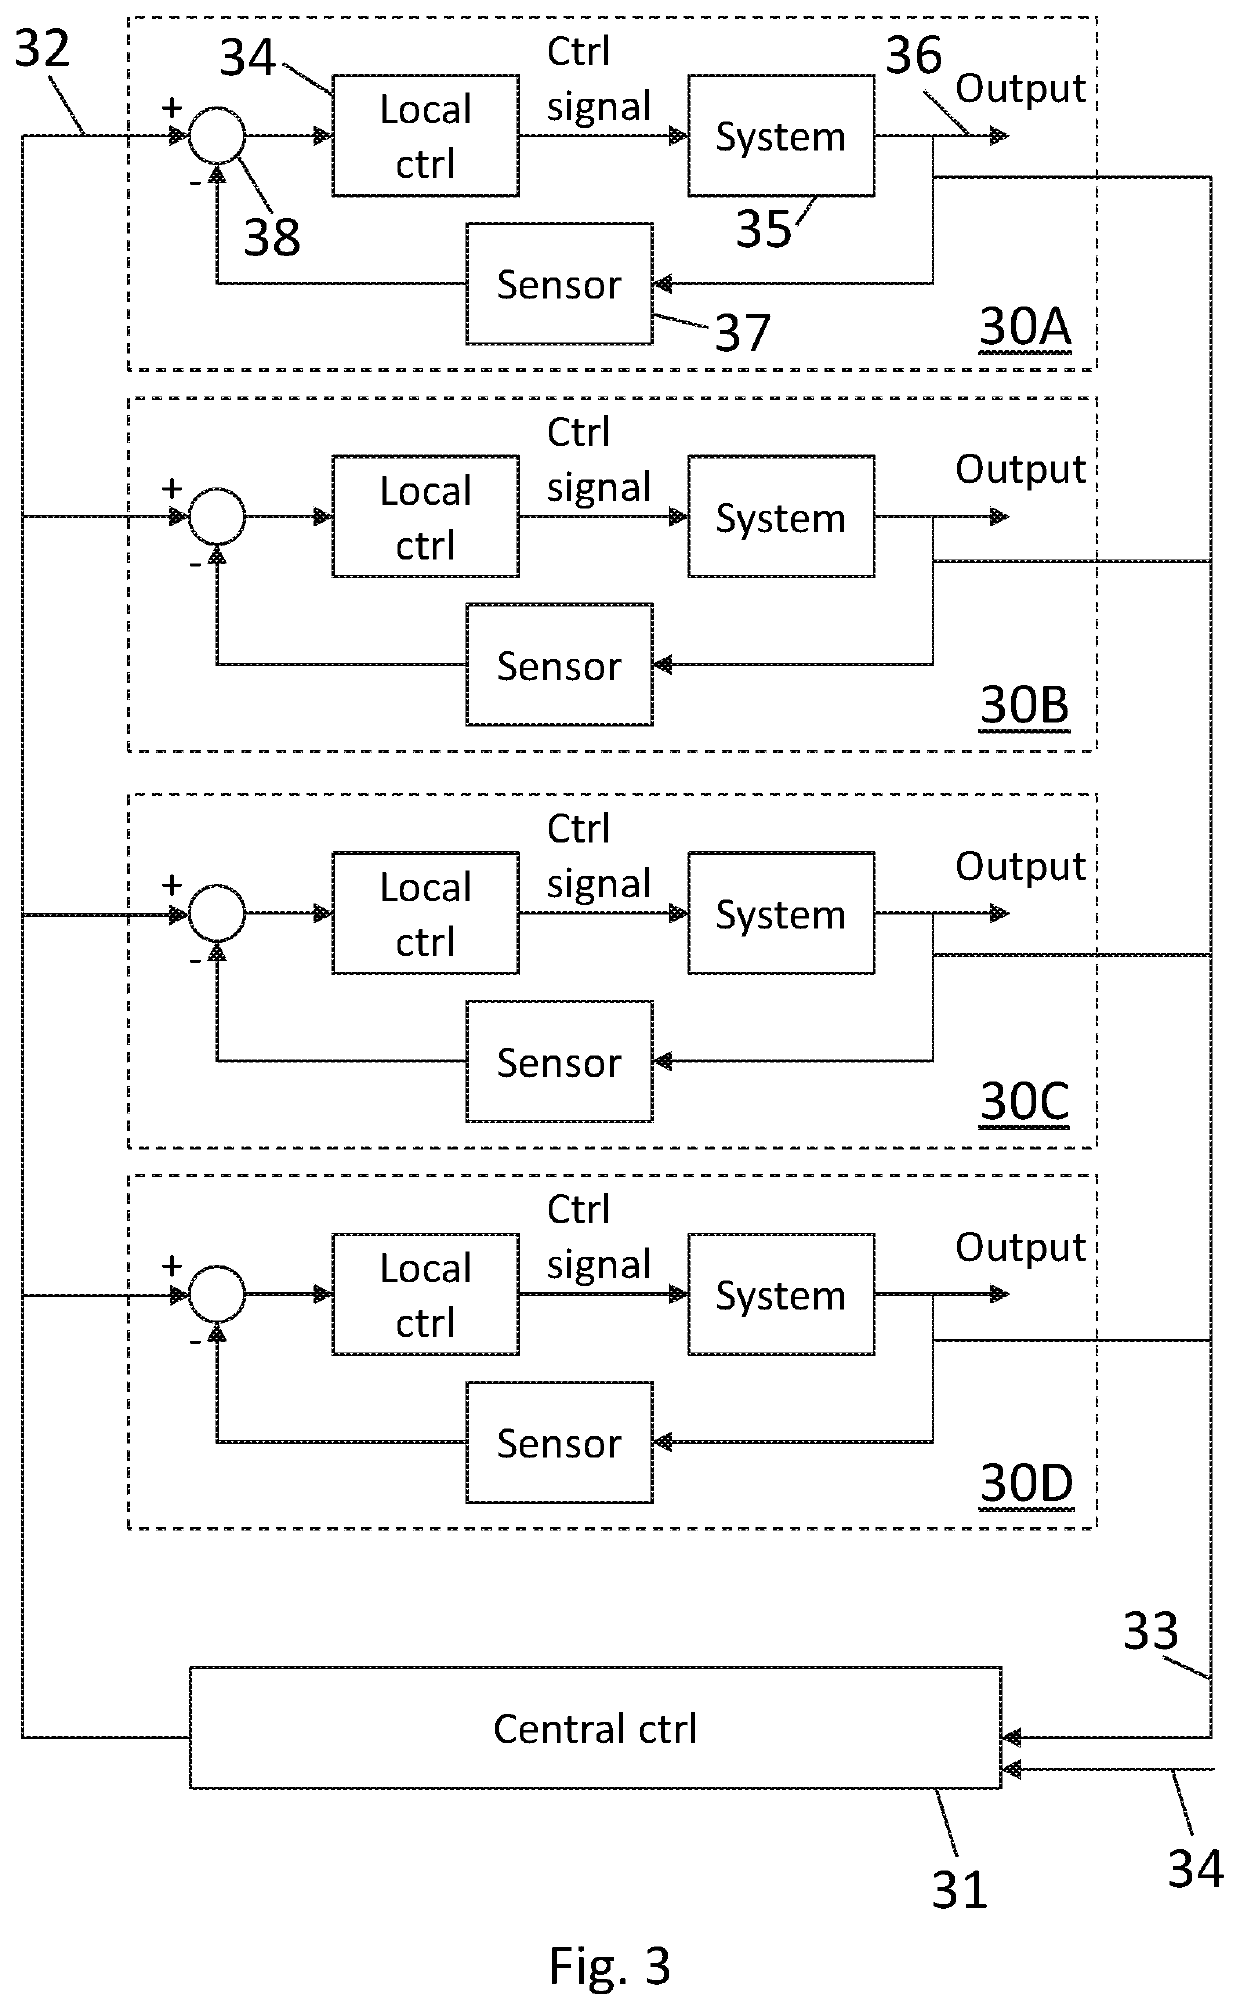 Control of a multi-rotor wind turbine system using a central controller to calculate local control objectives